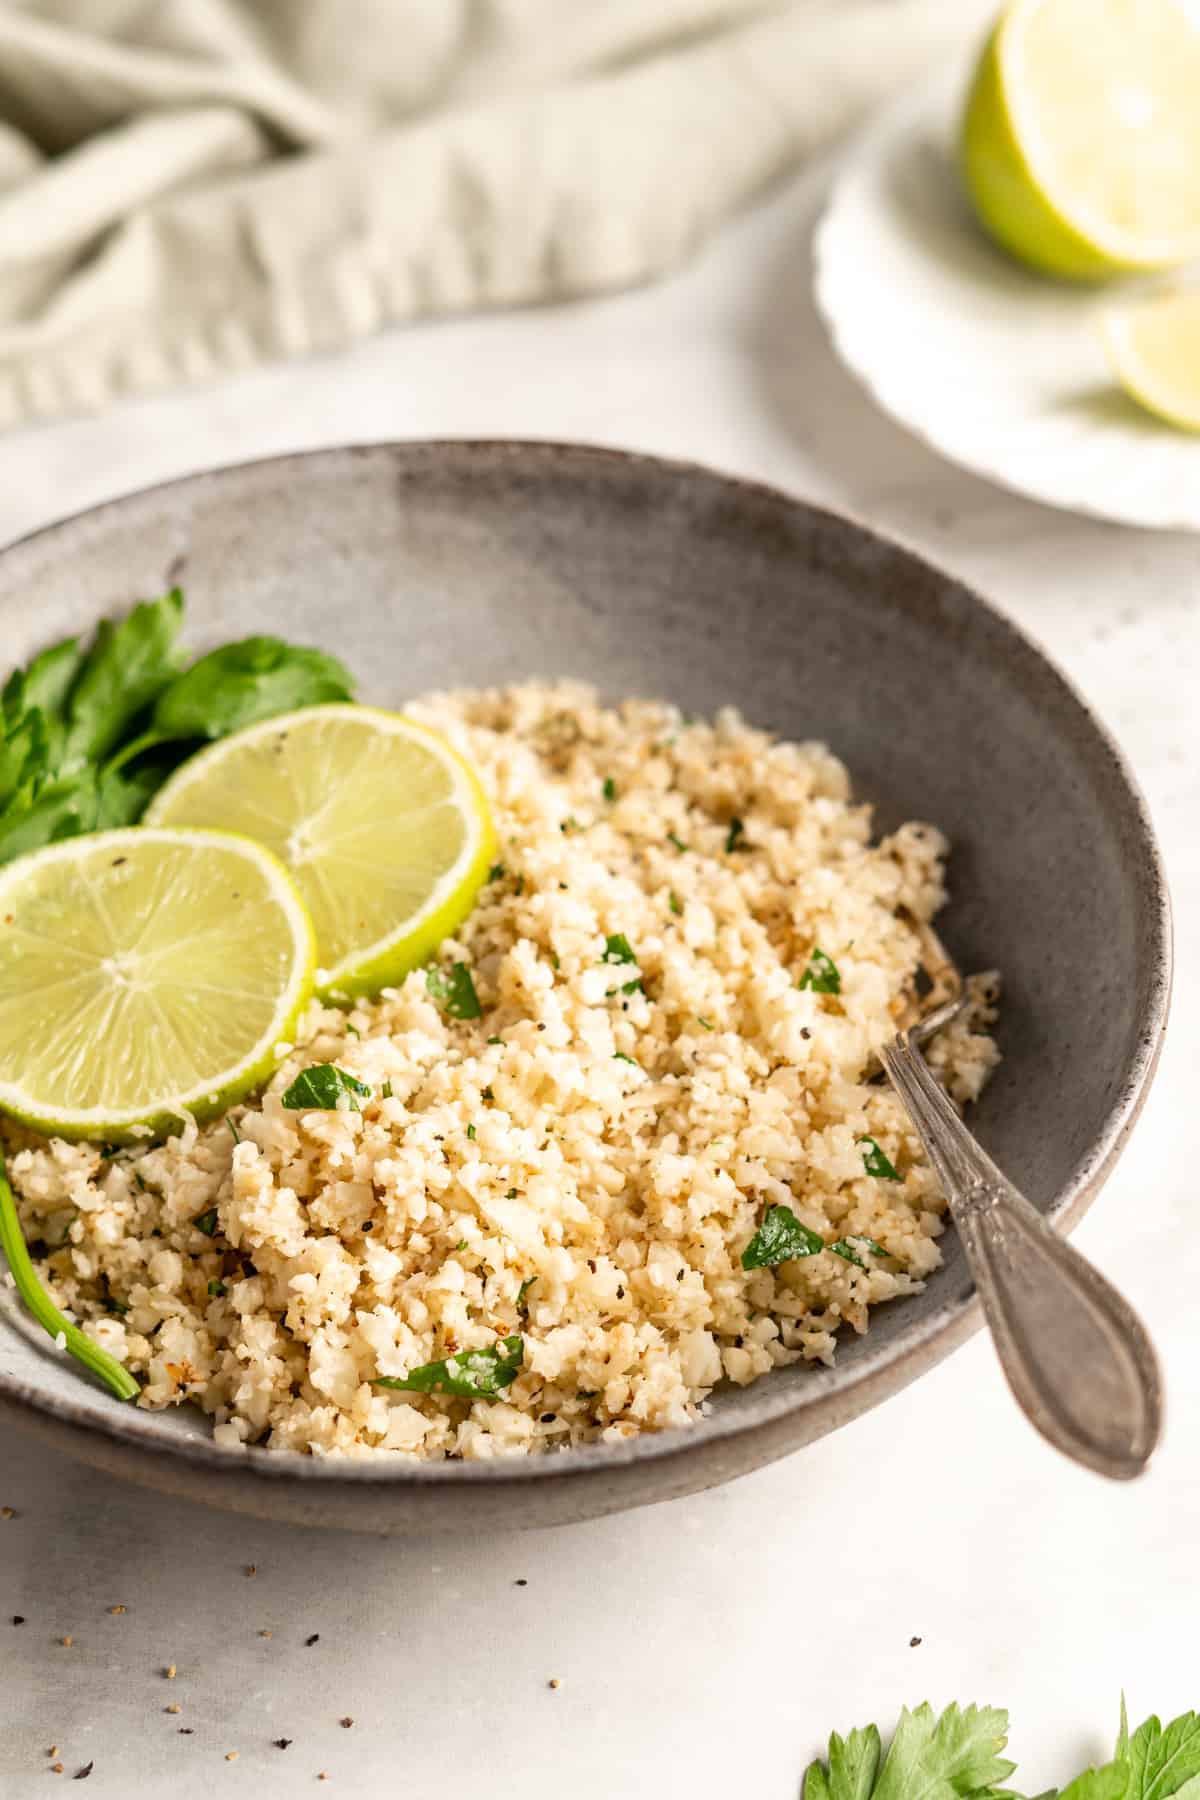 Cauliflower rice in bowl with fork, garnished with lime slices and parsley